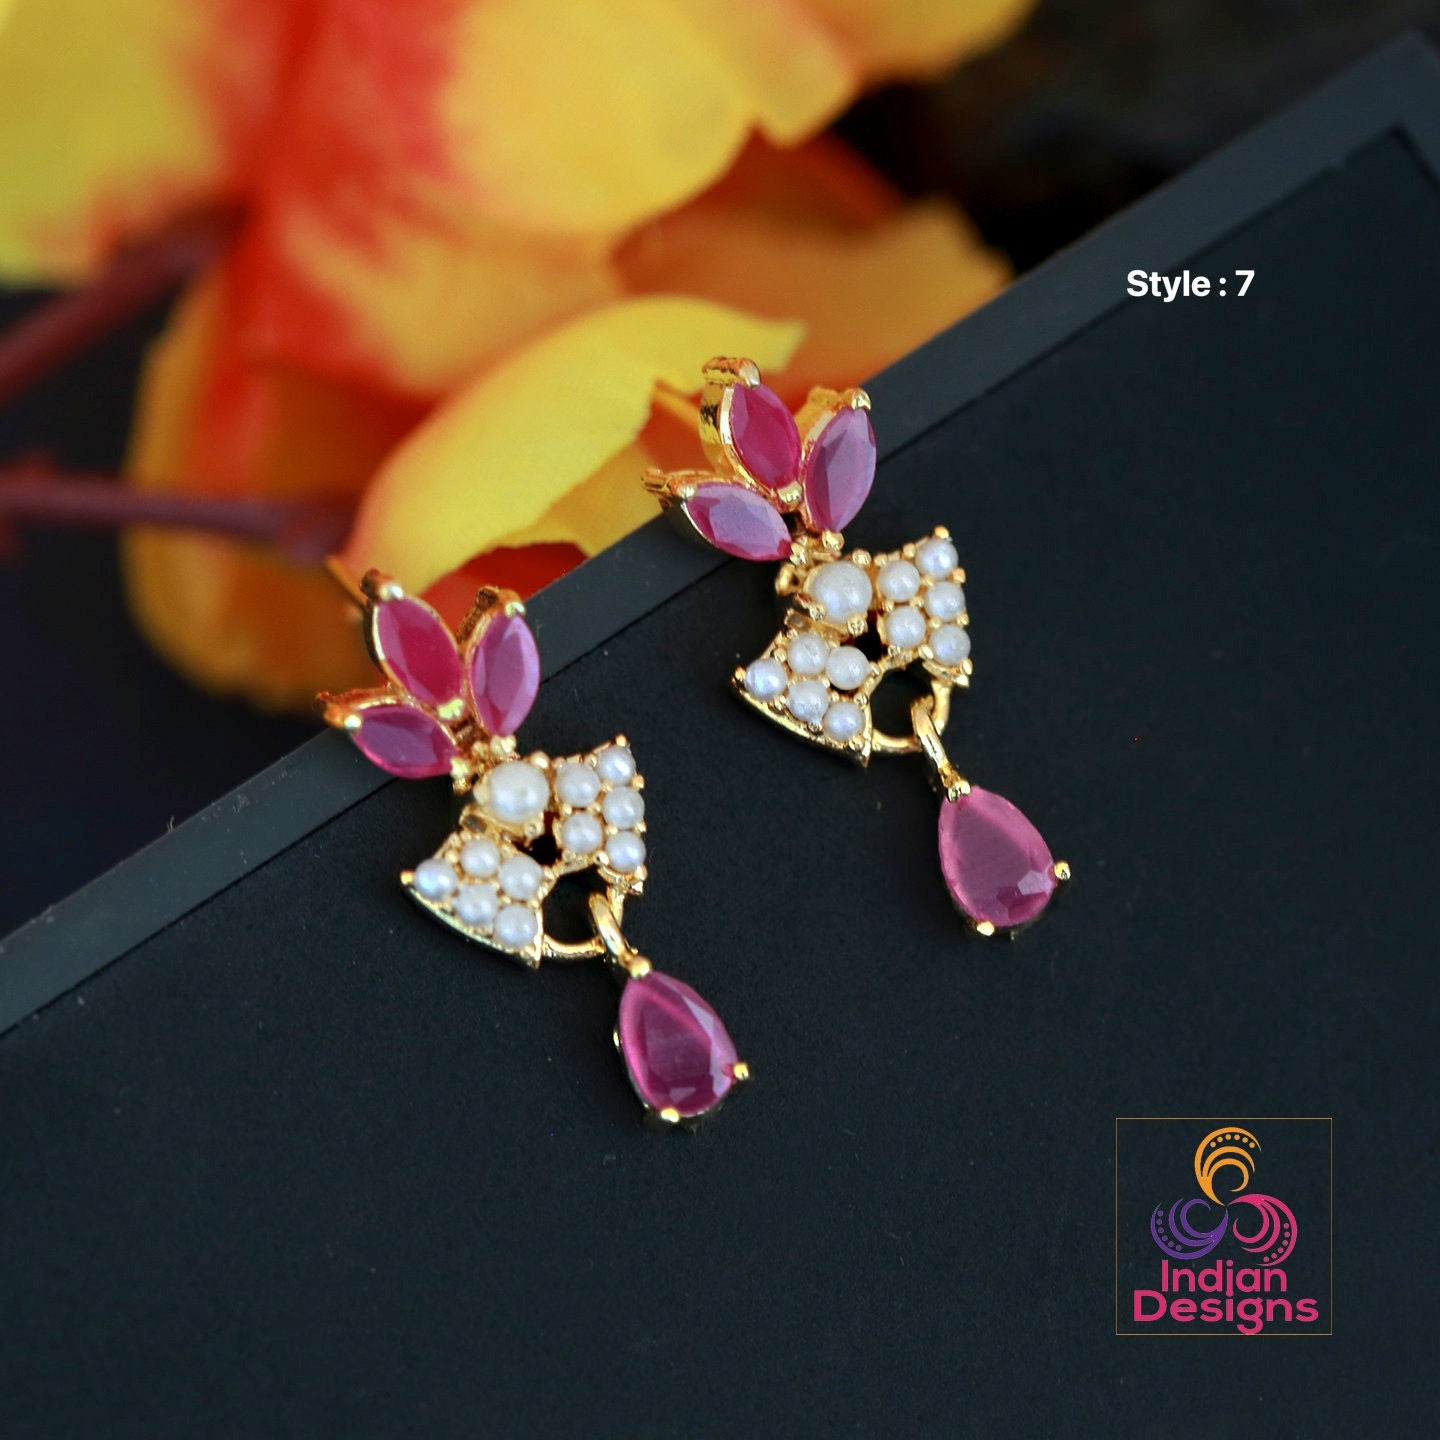 Buy Gold Plated High Quality Ruby Stone Danglers Earrings for Girls